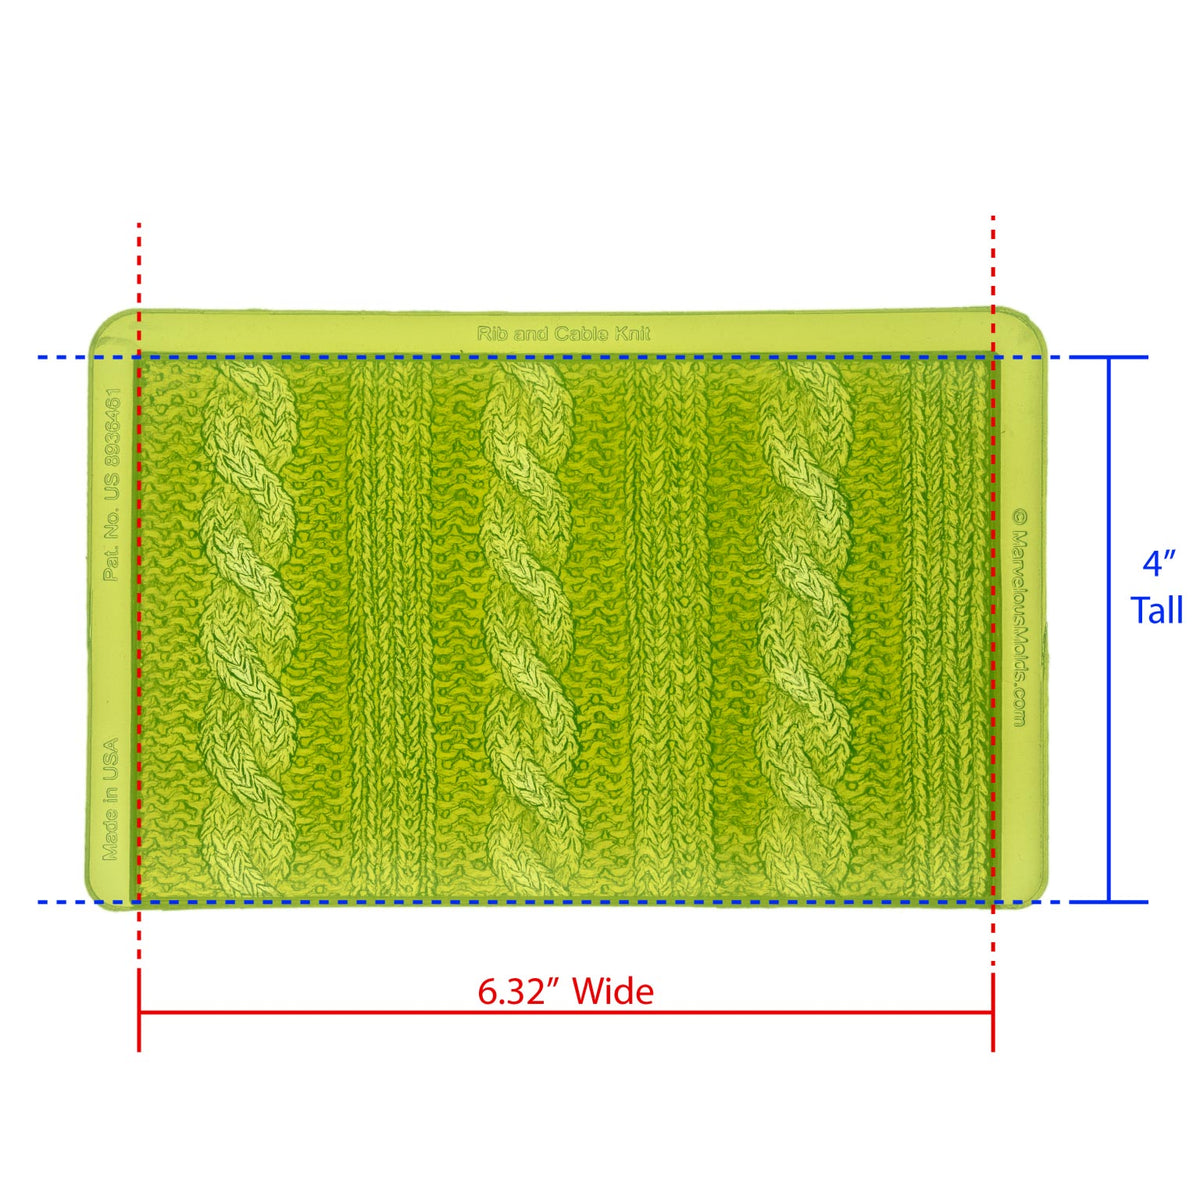 Rib and Cable Knit Silicone Simpress Mold Cavity measures 6.32 inches Wide by 4 inches Tall, Proudly Made in USA